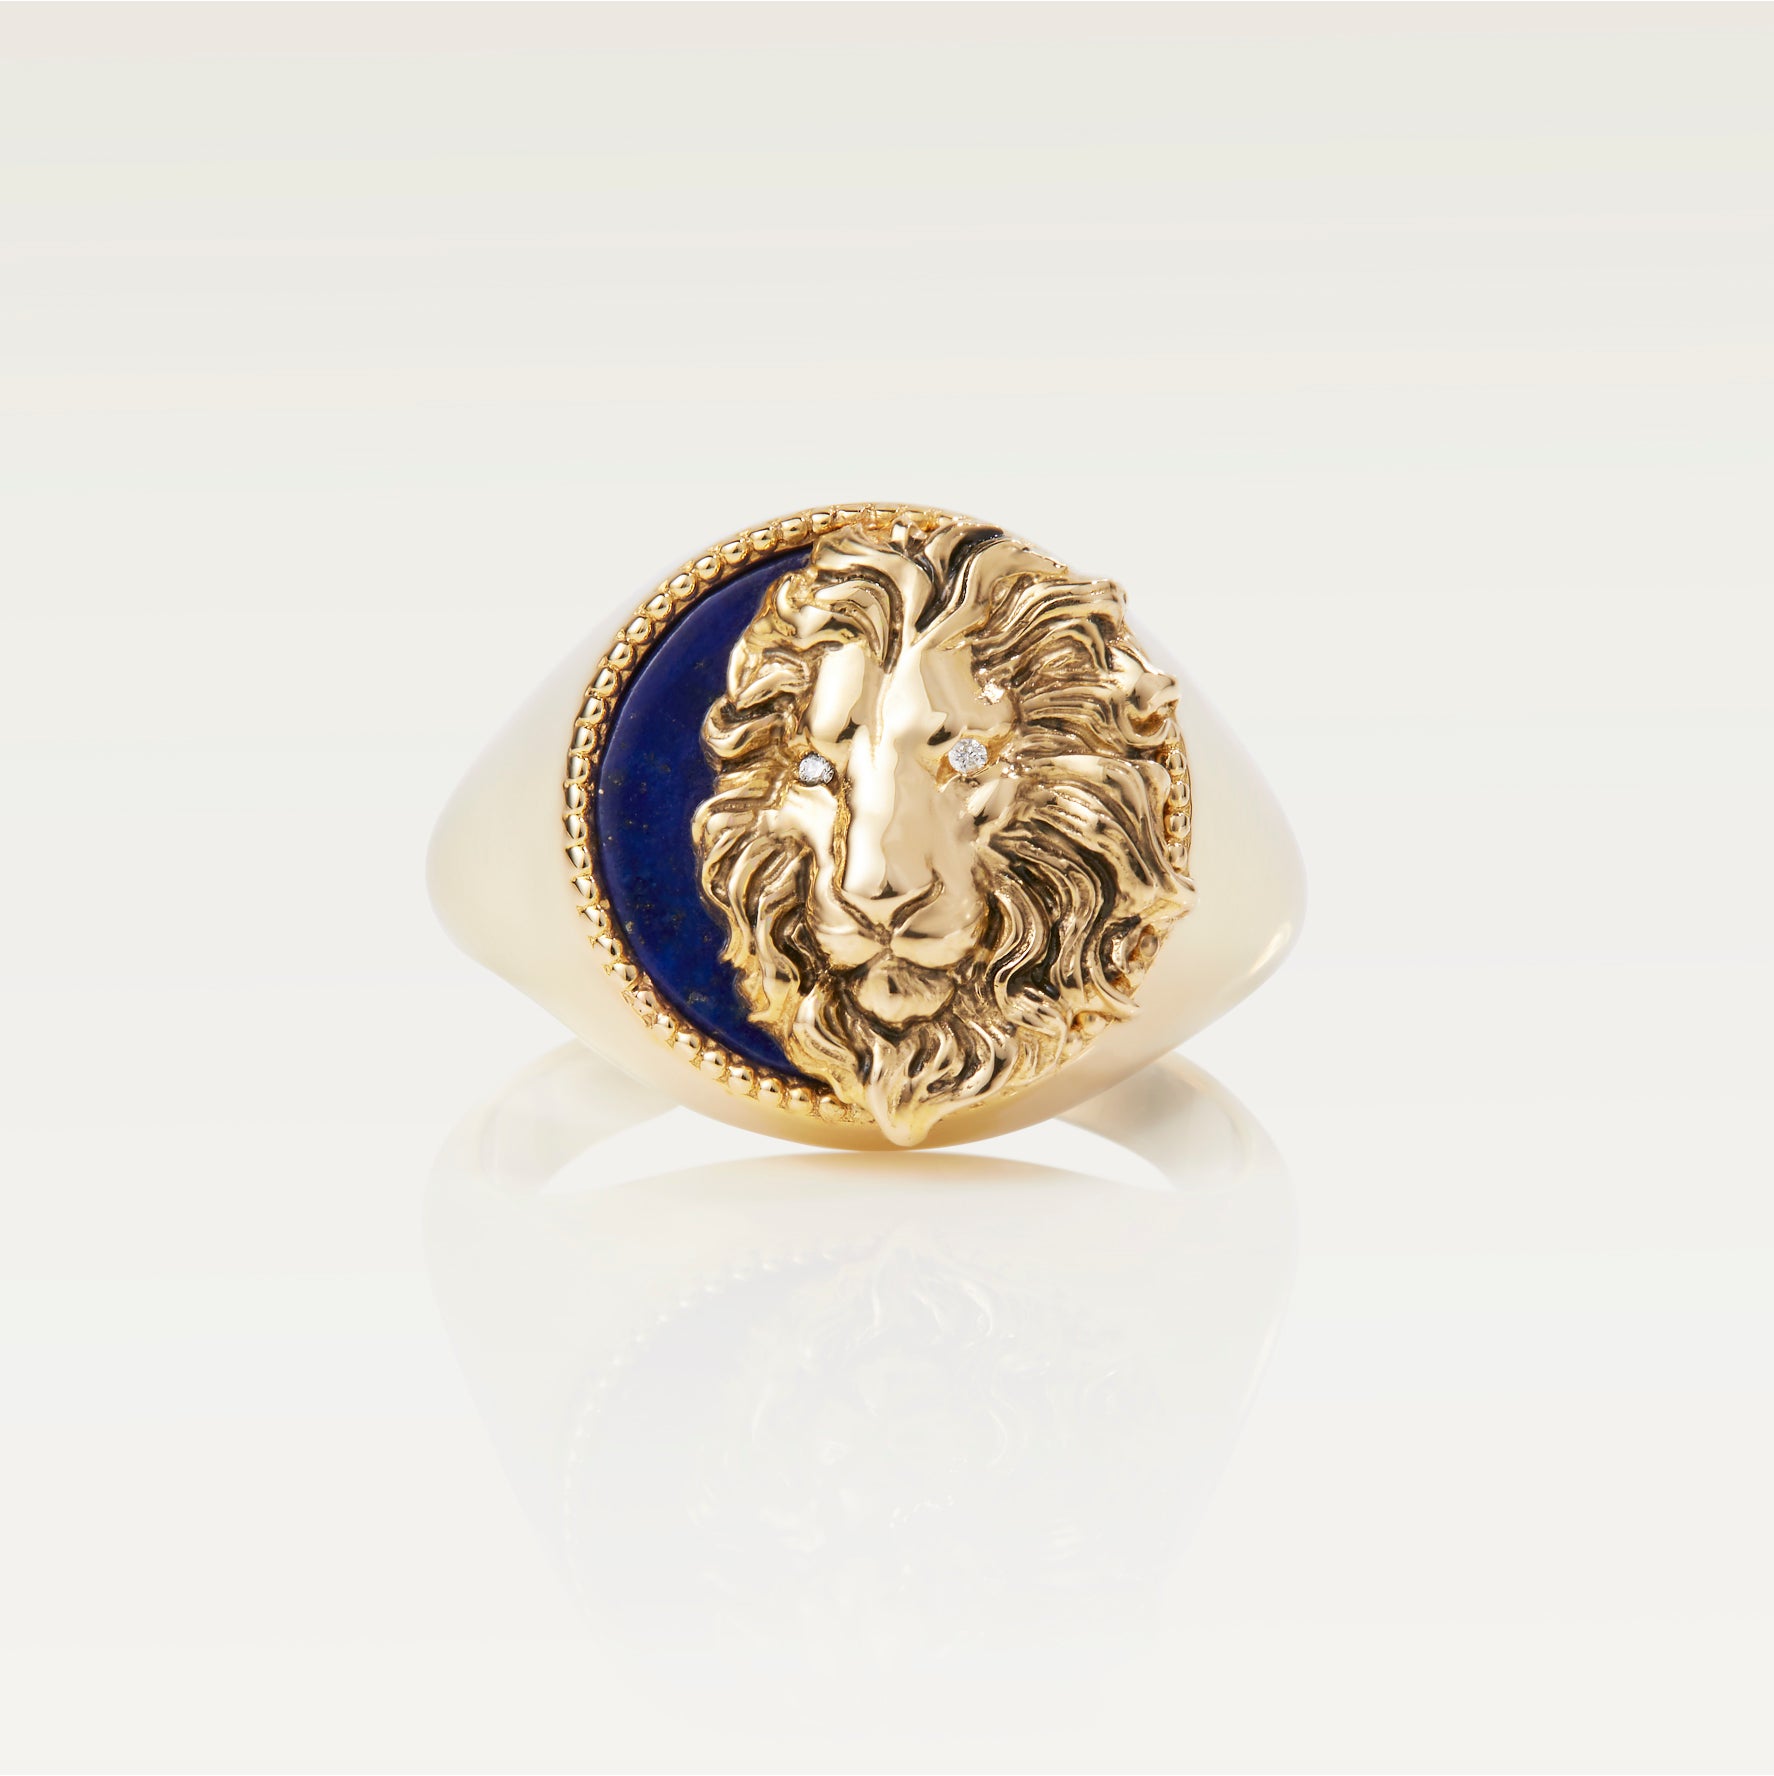 Sold at Auction: An 18ct gold signet ring with engraved lion